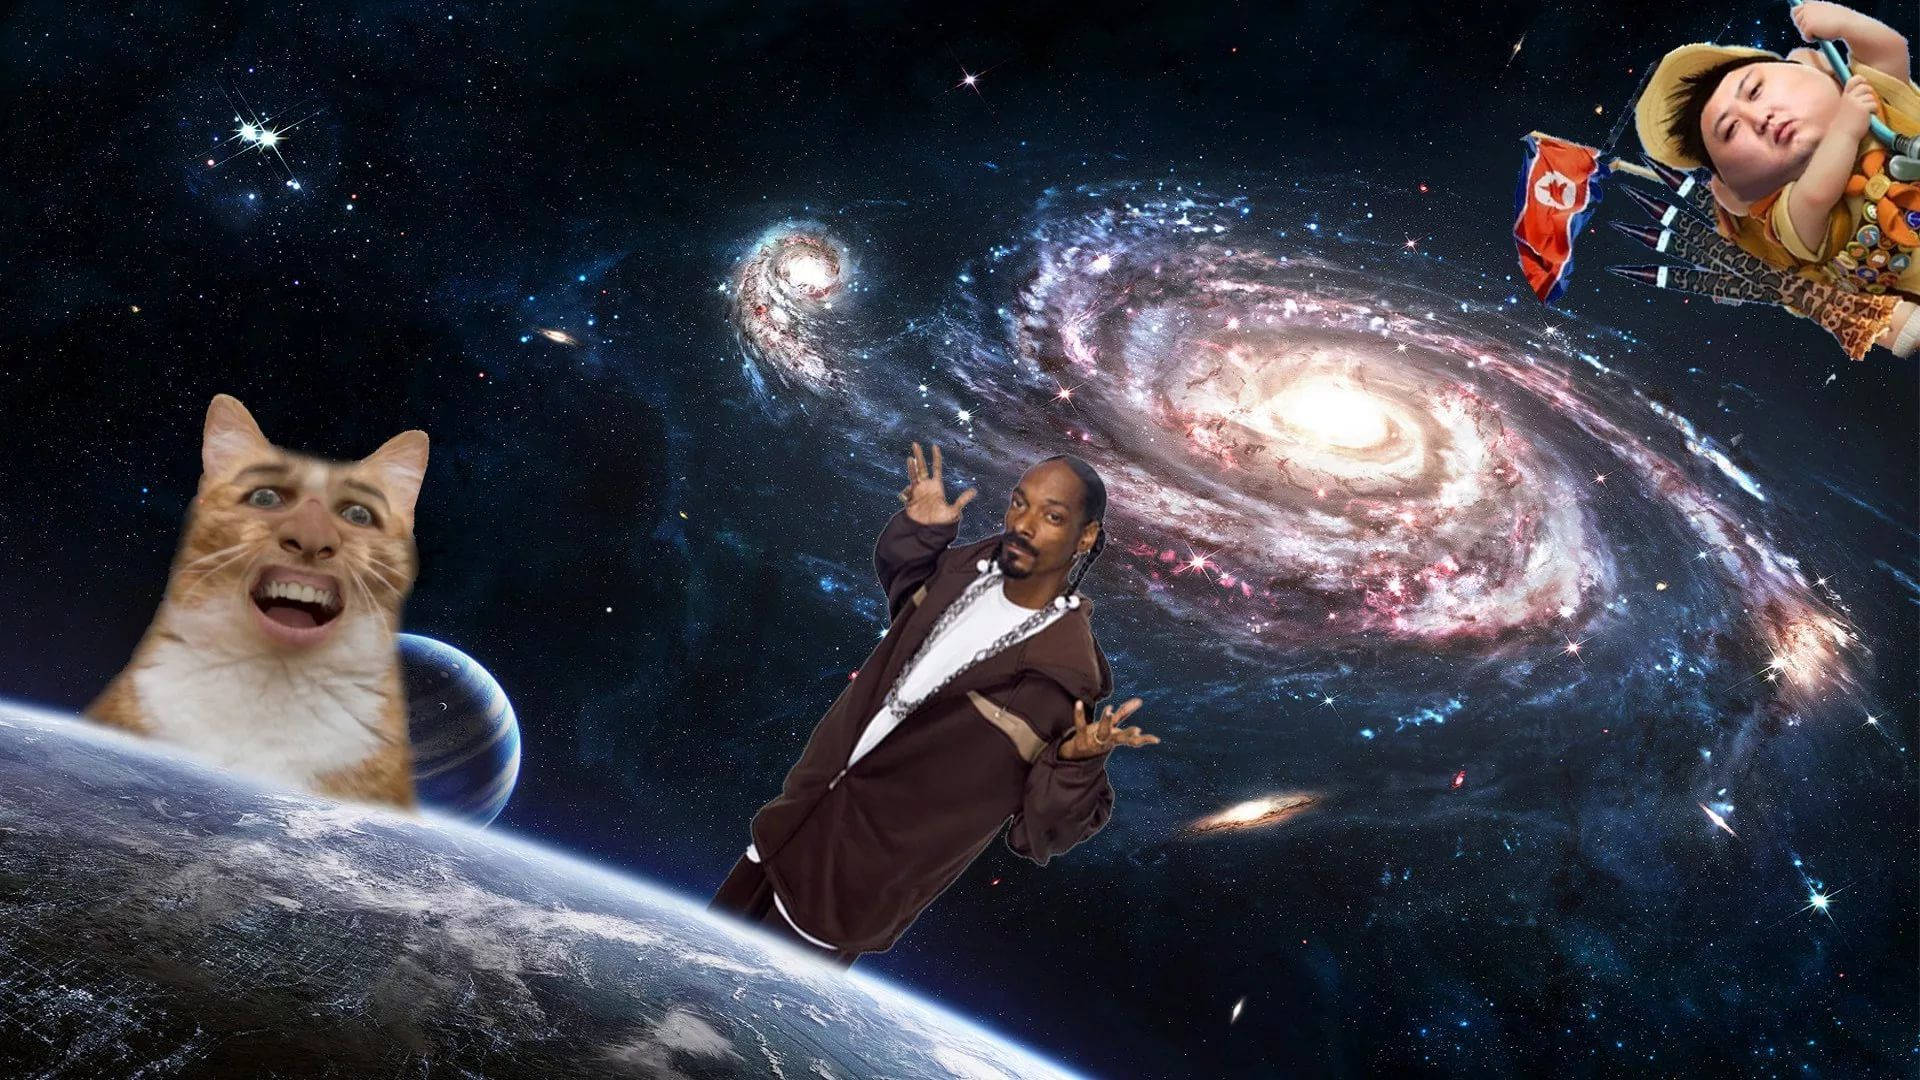 Funny meme face of Snoopdogg, Nicholas Cage cat and cartoon Kid Up in outer space.